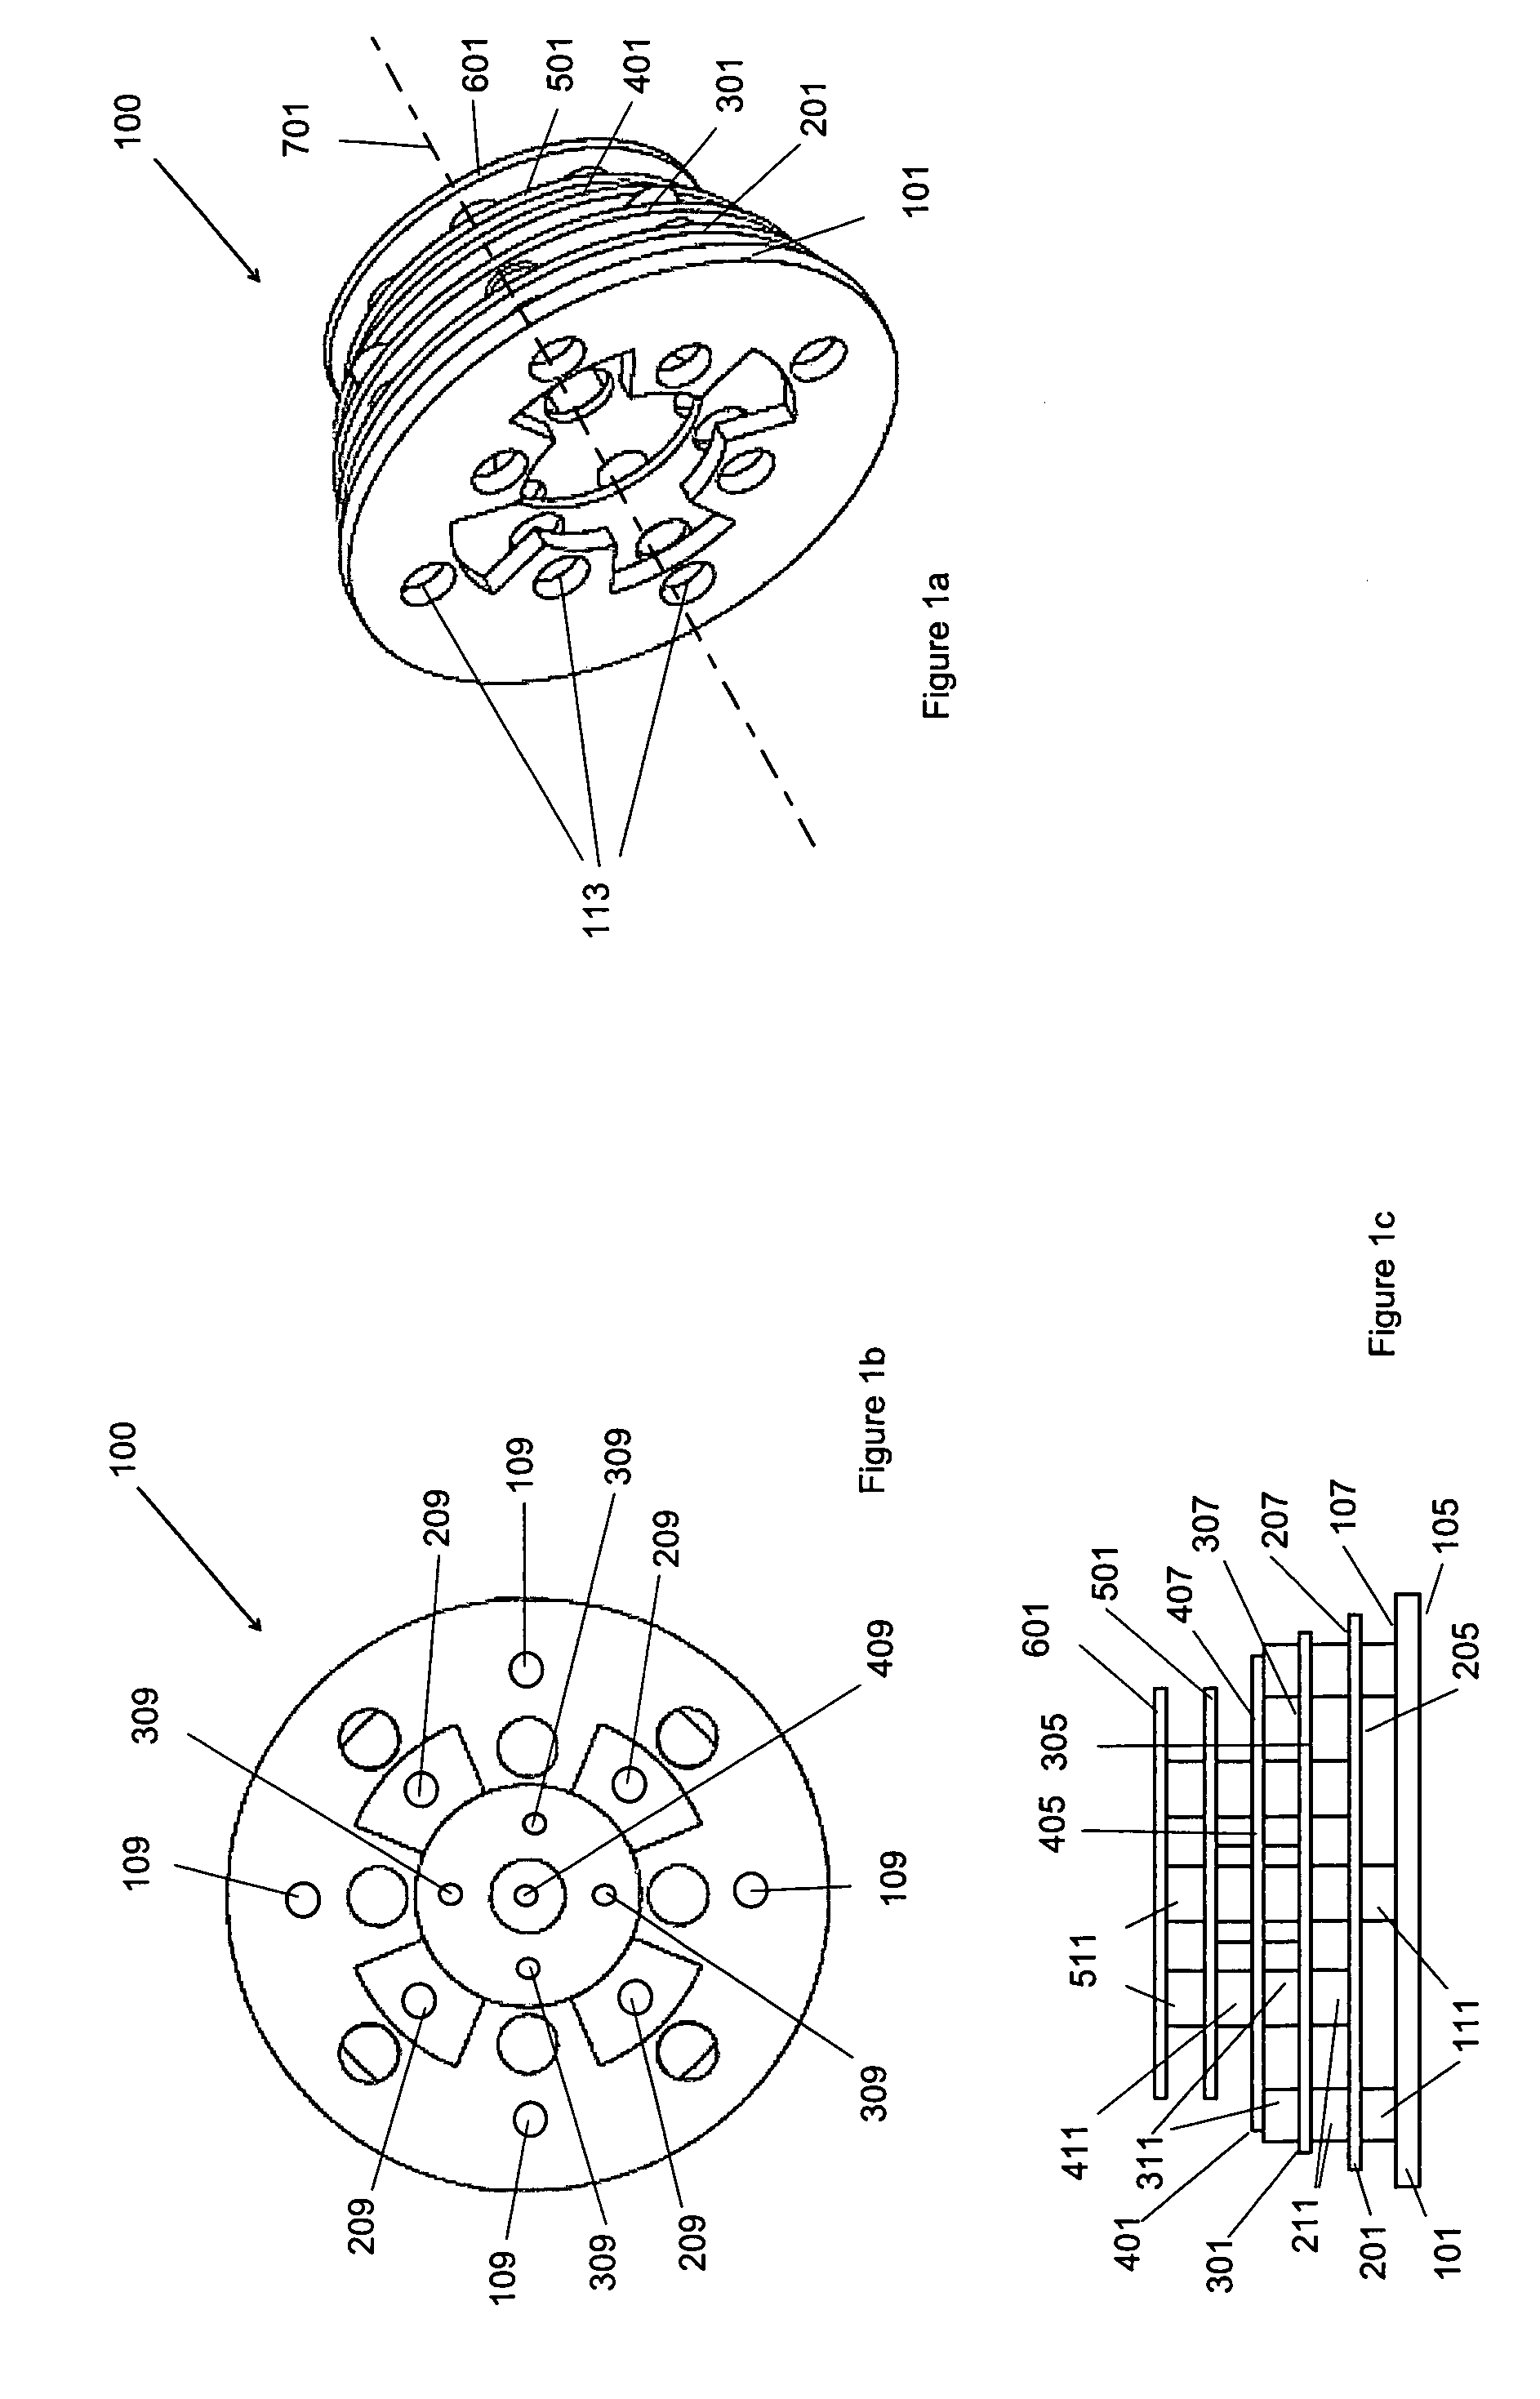 LED assembly and use thereof